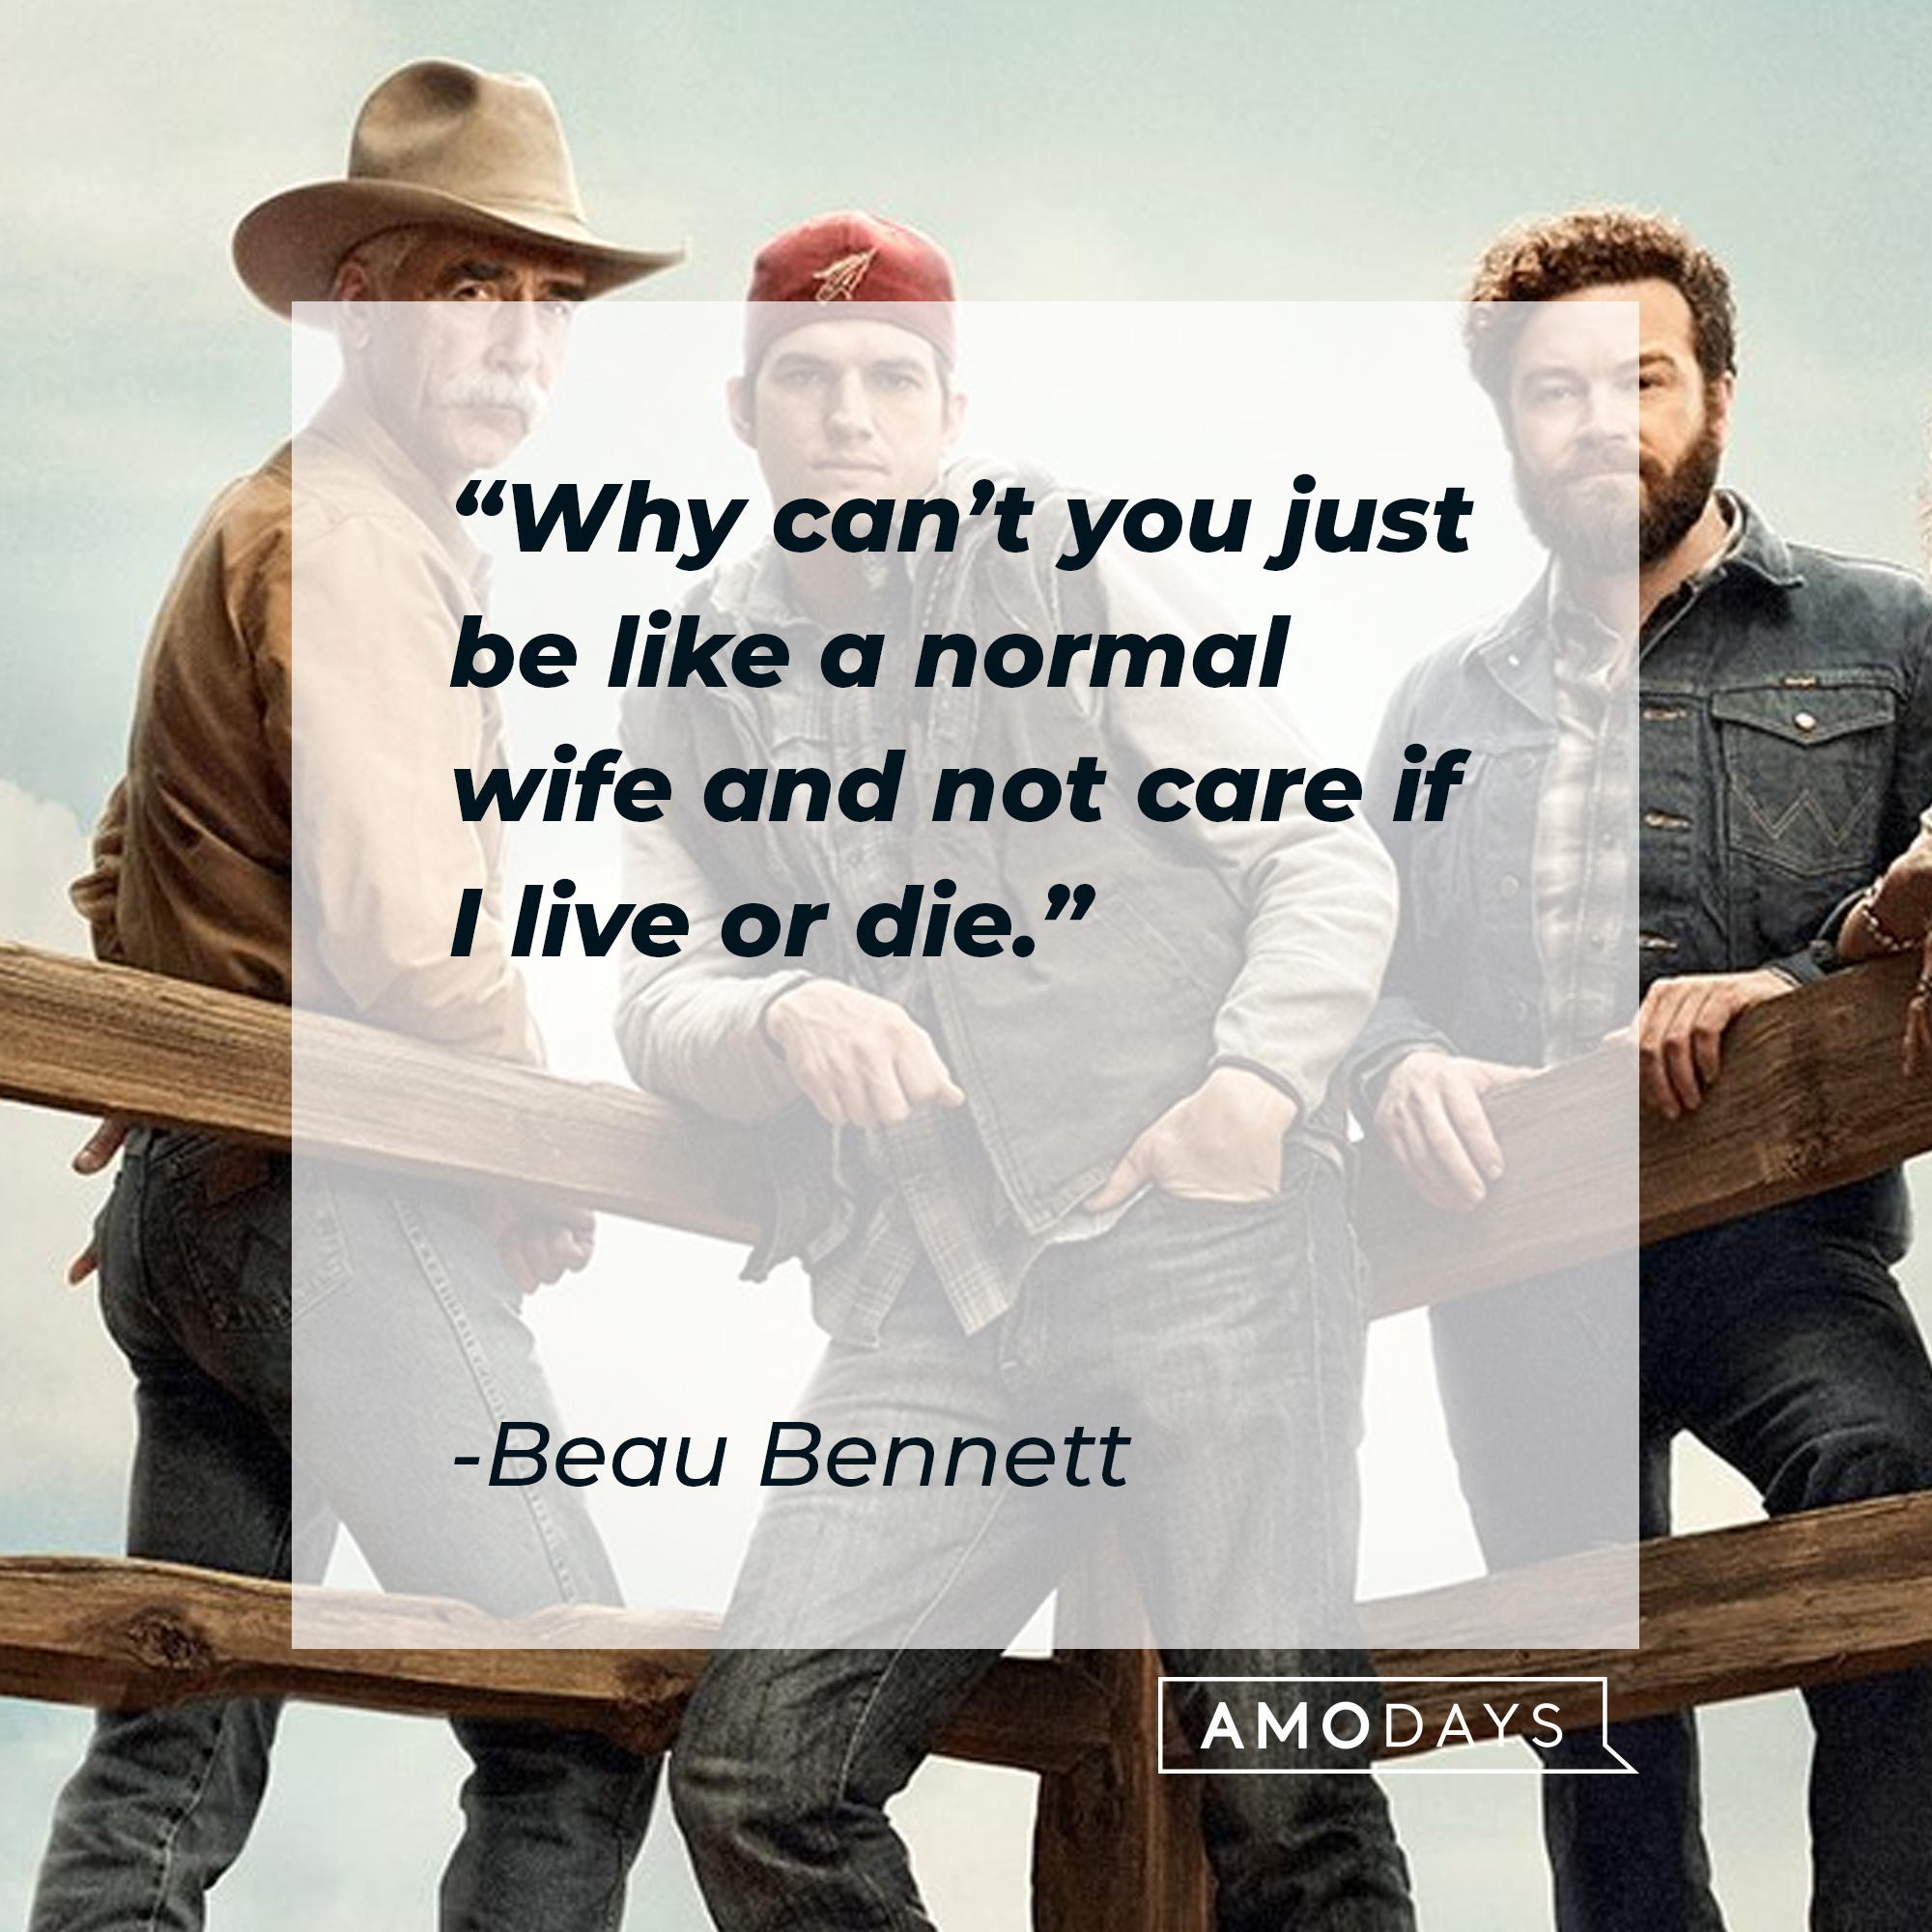 Beau Bennett and his sons, with his quote: “Why can’t you just be like a normal wife and not care if I live or die.” | Source: facebook.com/TheRanchNetflix